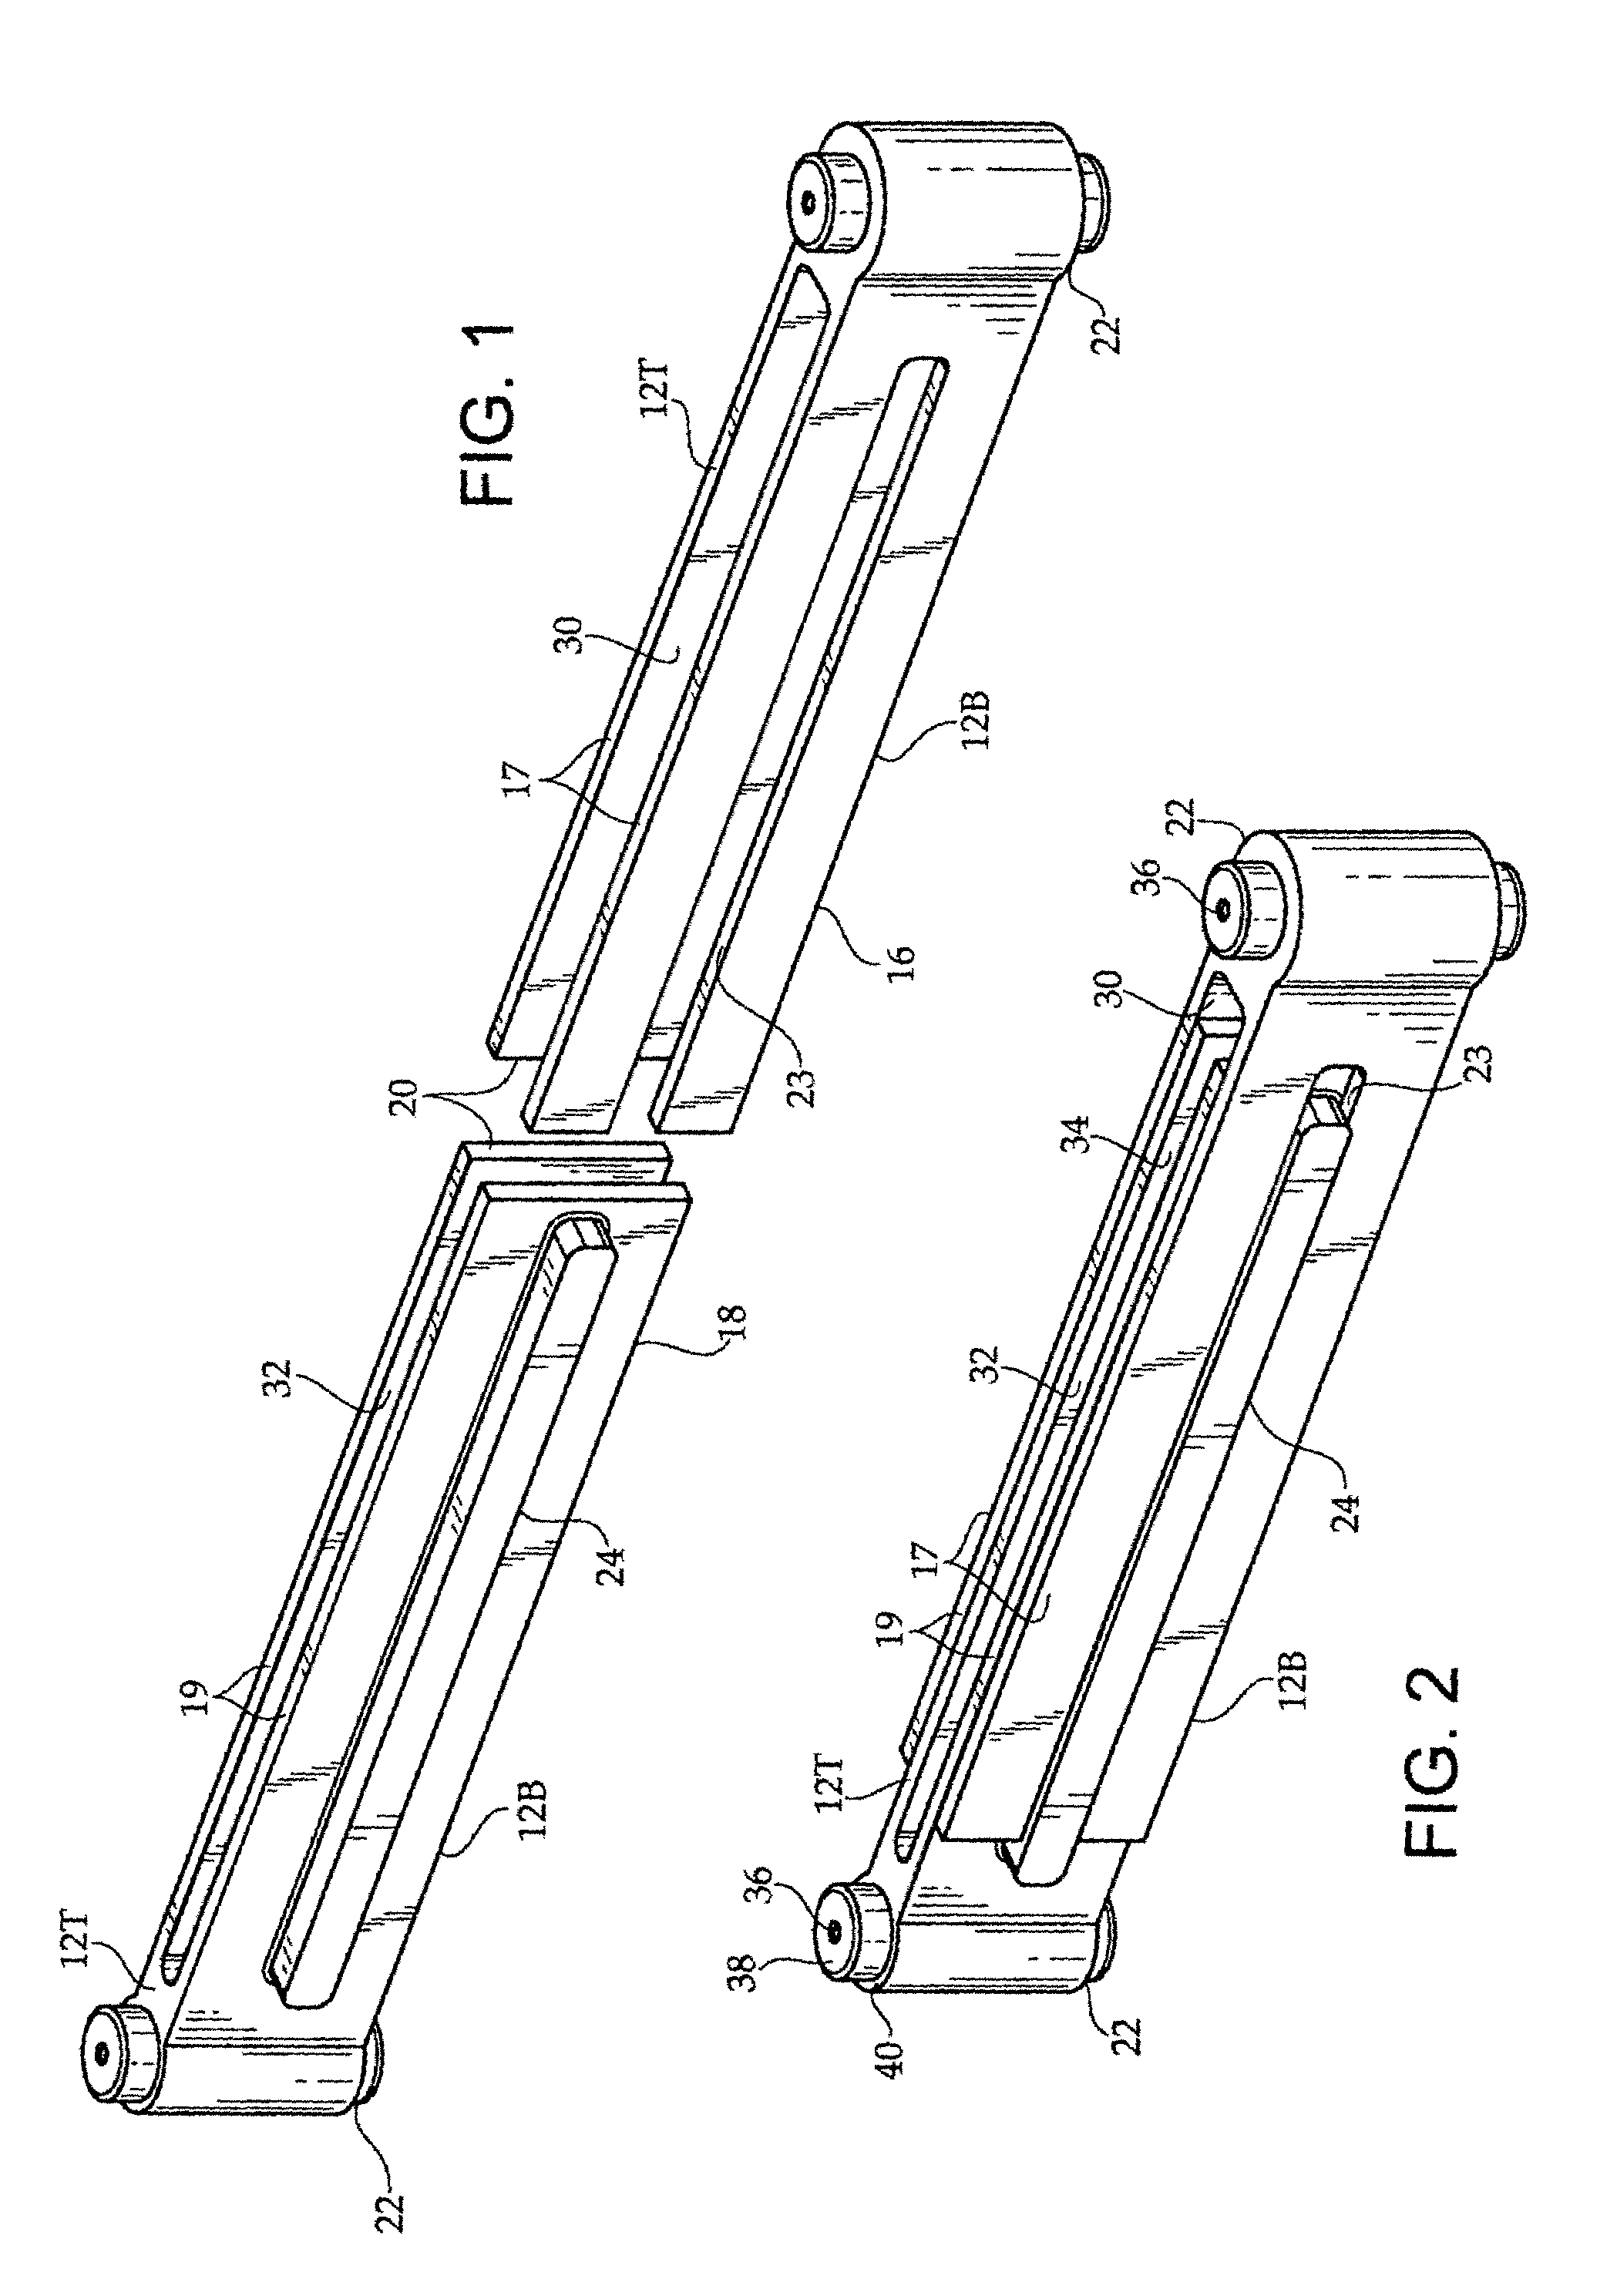 Adjustable osteotomy guide